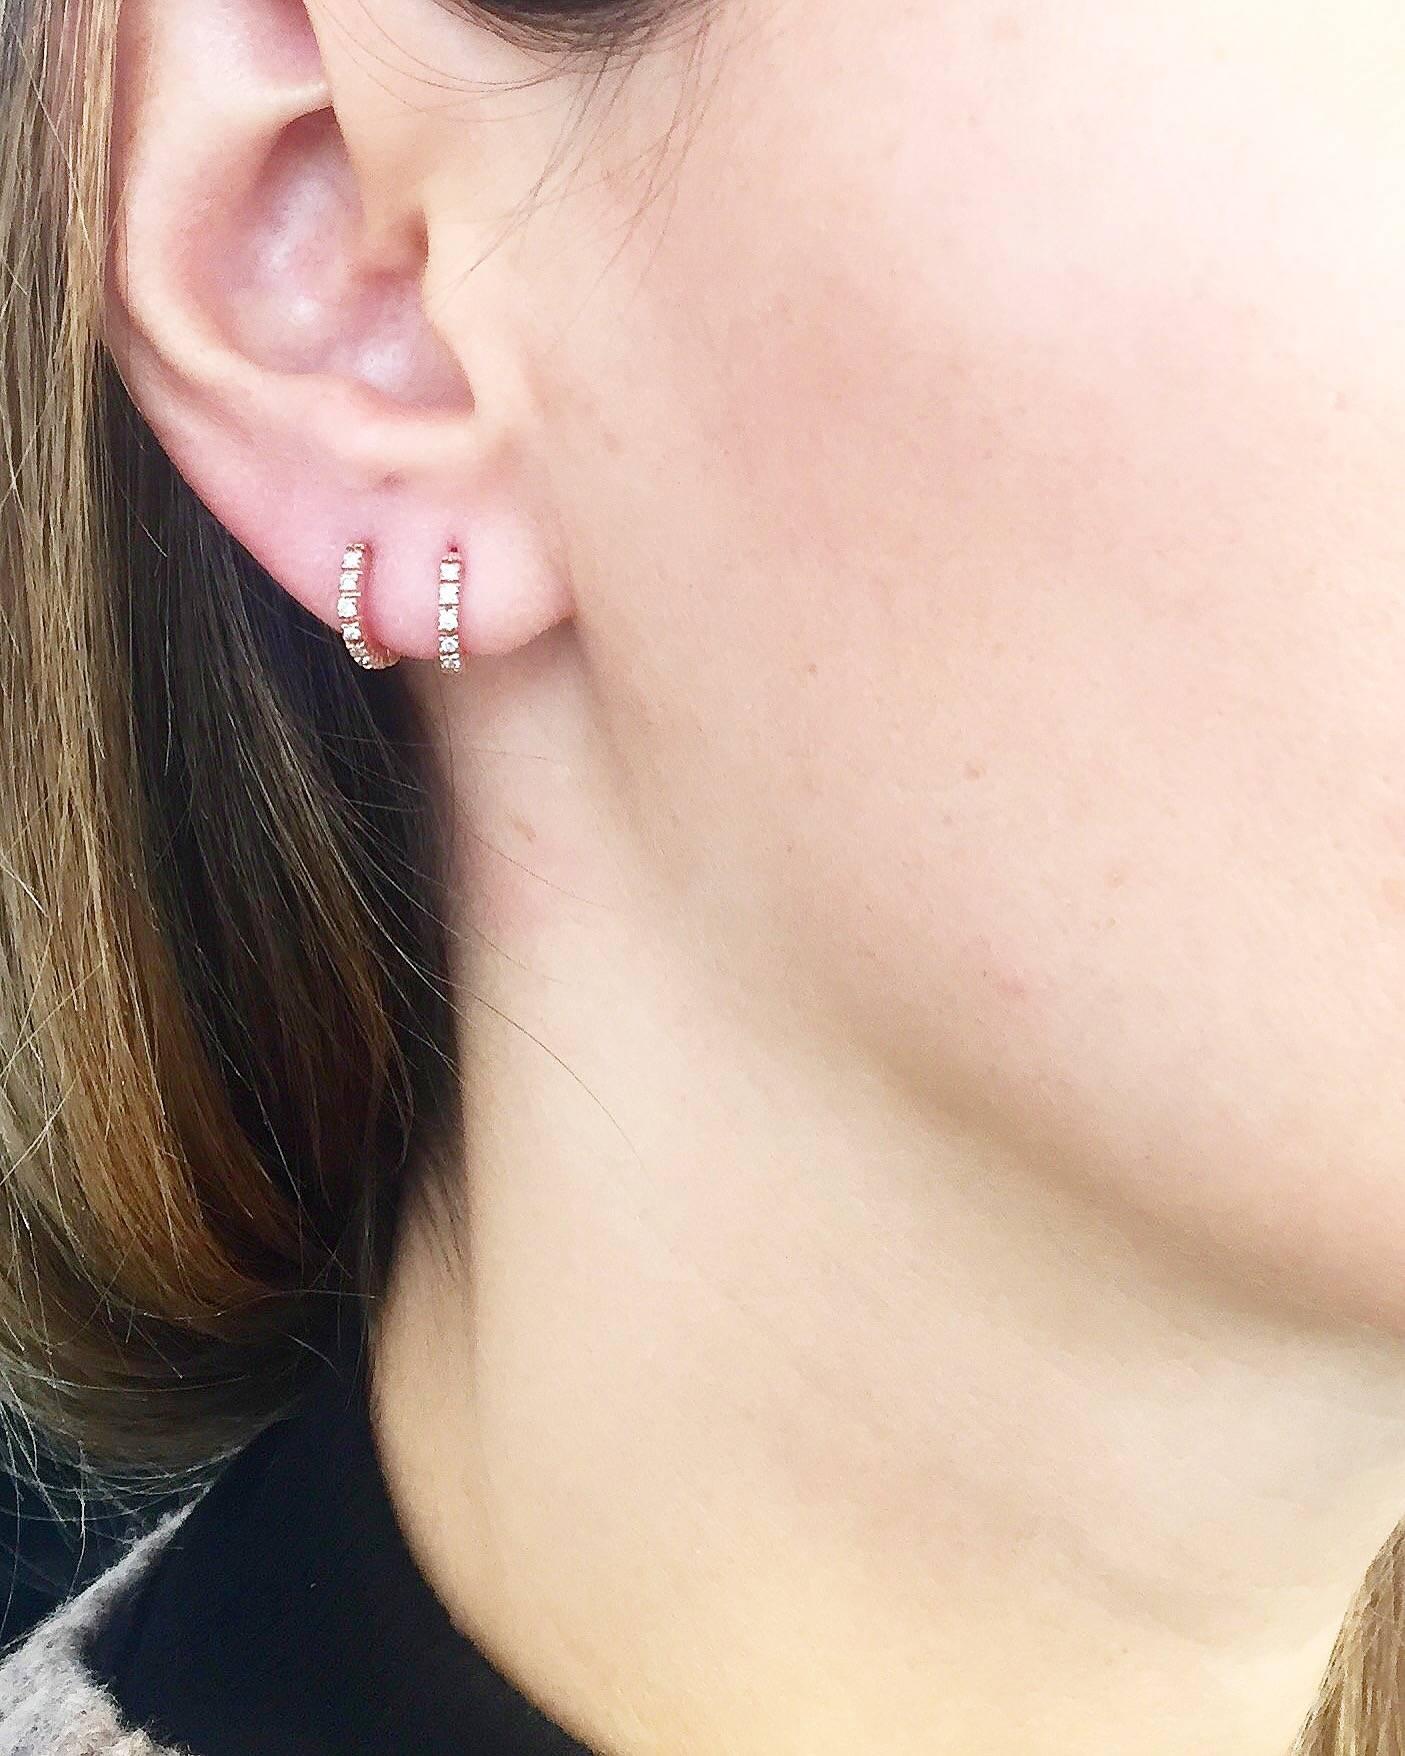 This hoop earring are made in Italy of 18k rose gold and embellished with 0.05 carats of sparkling round brilliant cut diamonds. The delicate size makes it perfect for every day and to match with everything.

This earring are from our own